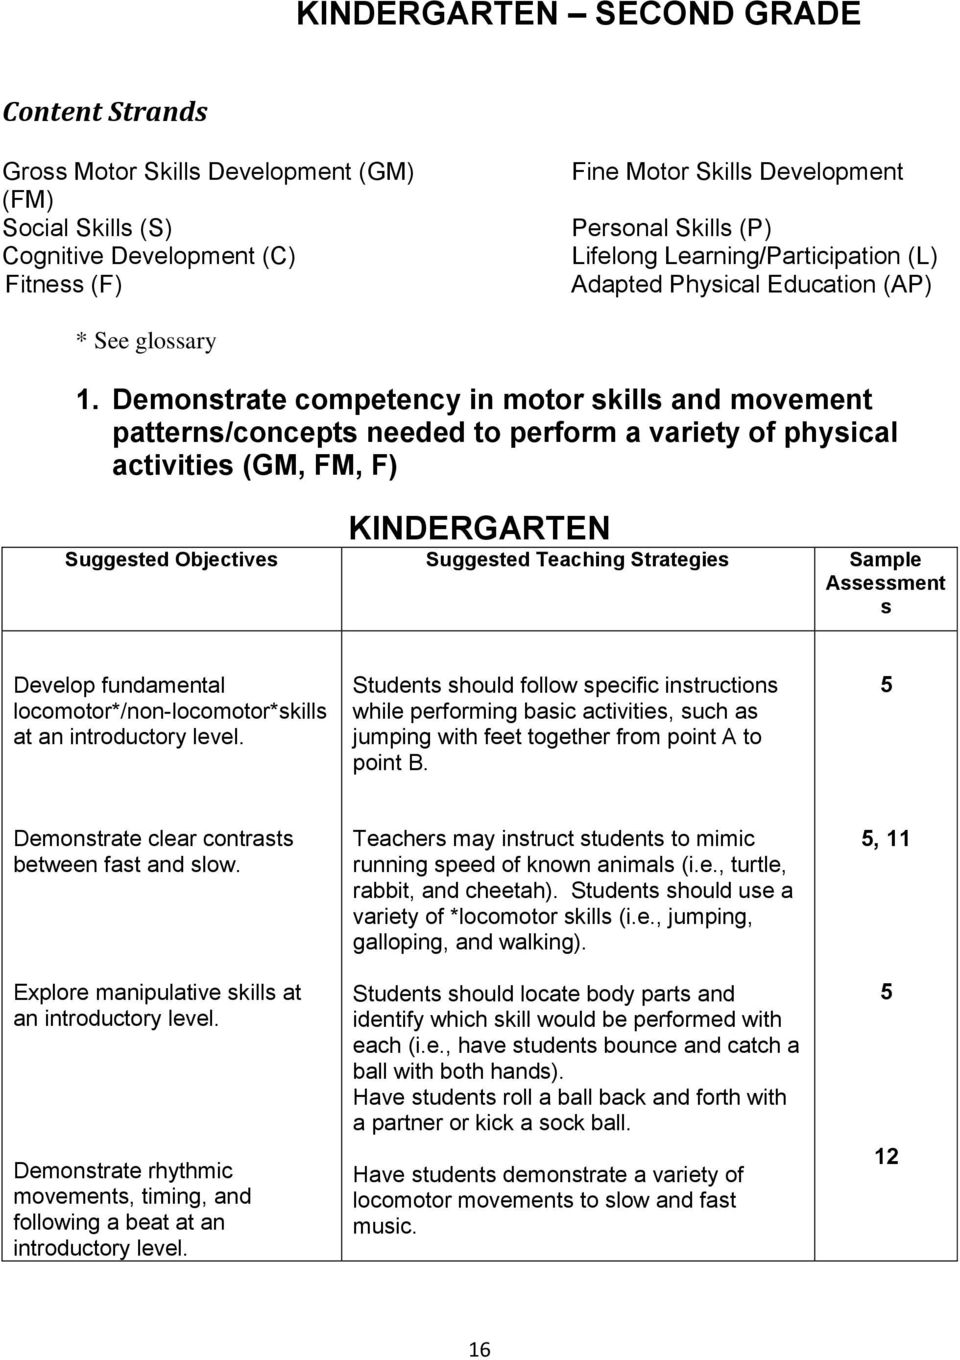 Demonstrate competency in motor skills and movement patterns/concepts needed to perform a variety of physical activities (GM, FM, F) KINDERGARTEN Suggested Objectives Suggested Teaching Strategies